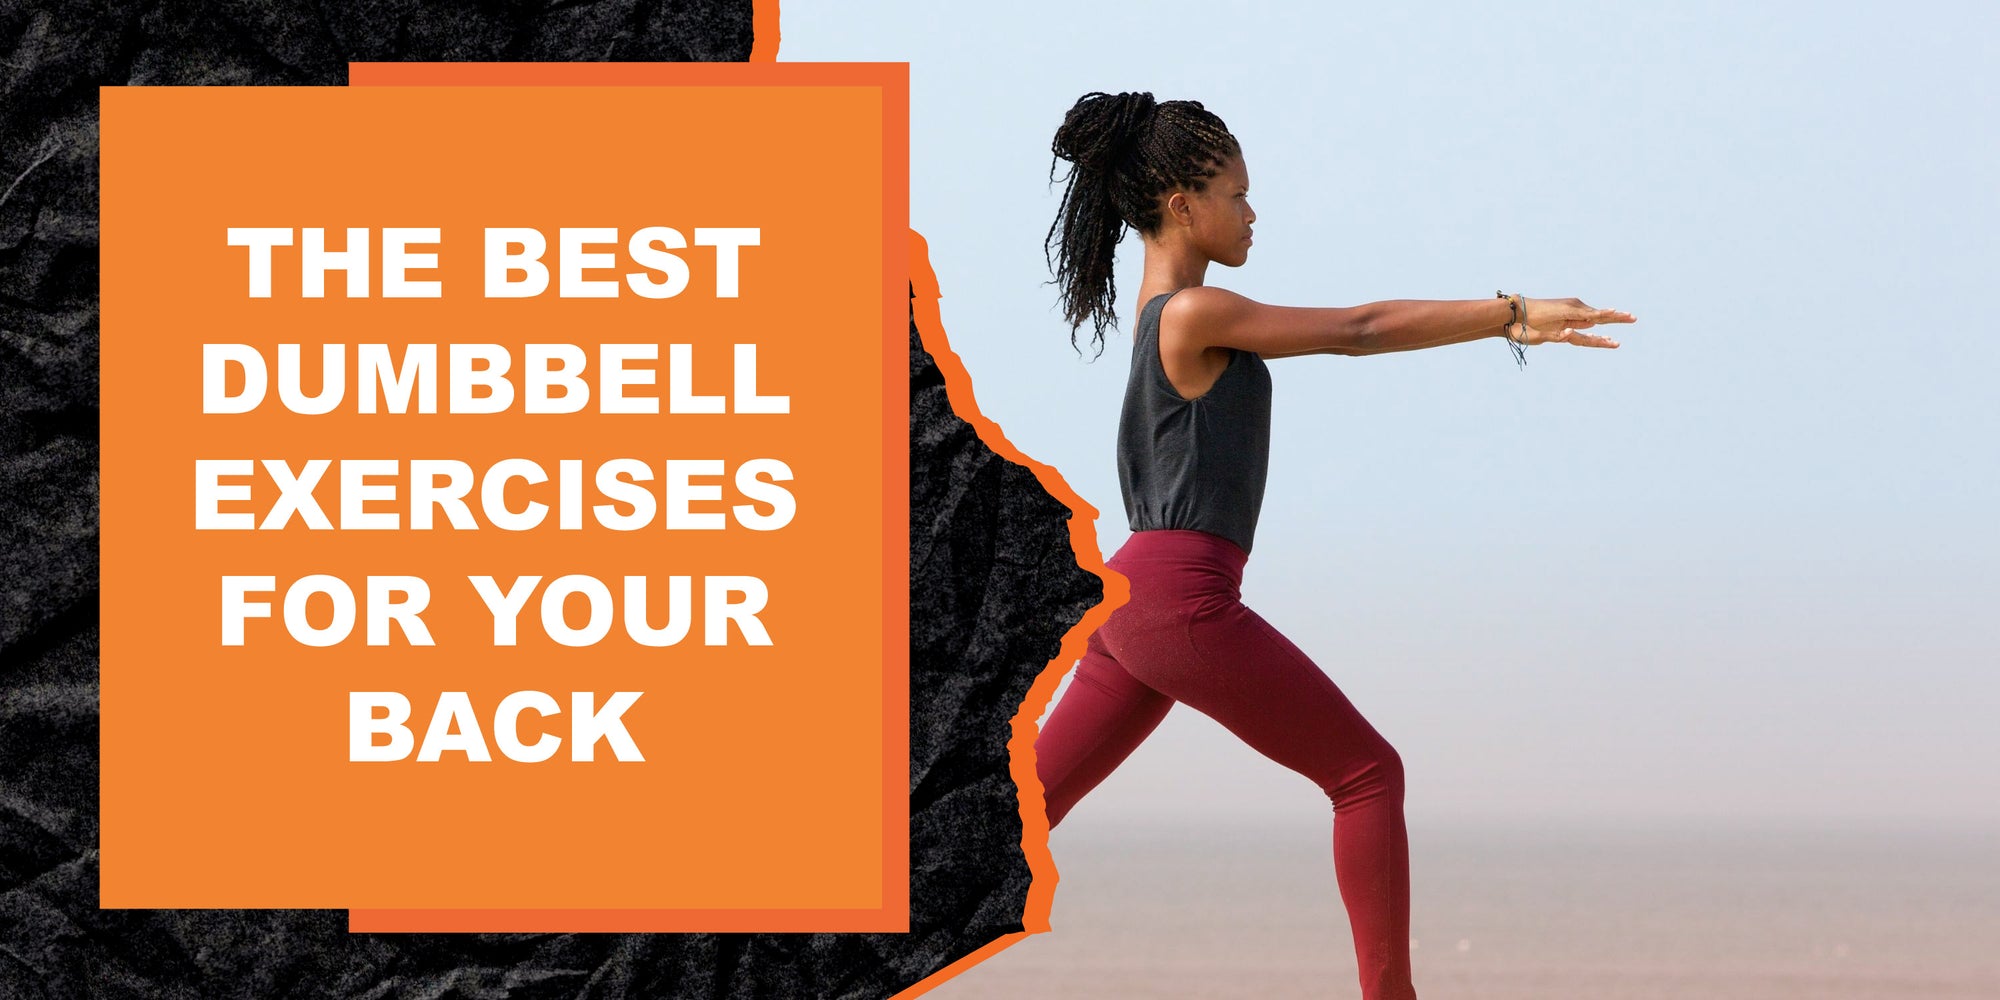 The Best Dumbbell Exercises for Your Back